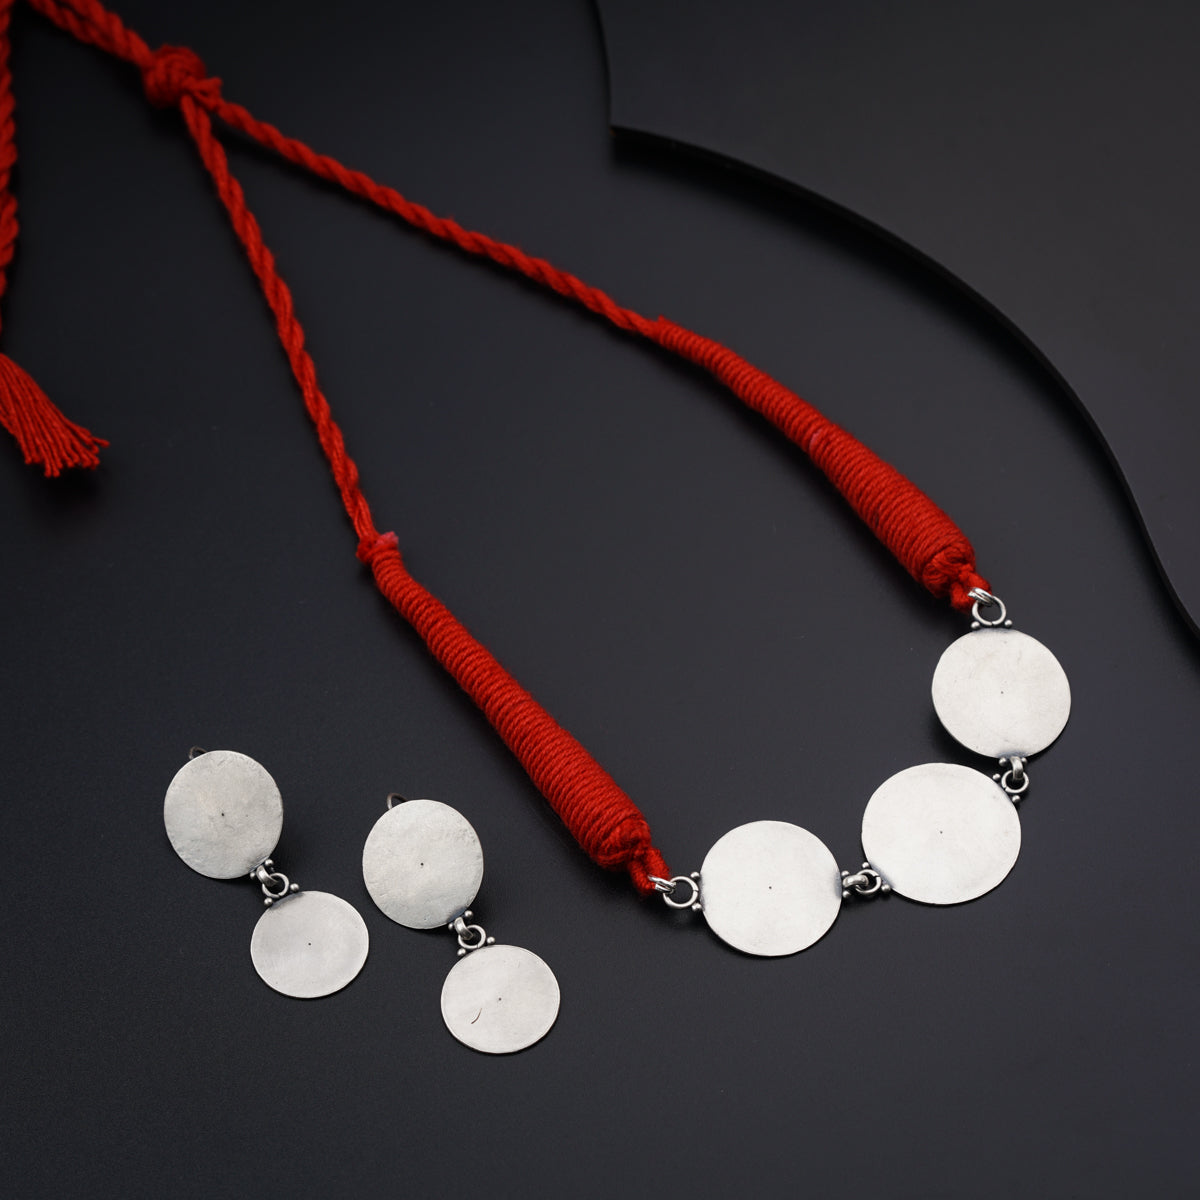 a necklace with three discs and a red tassel